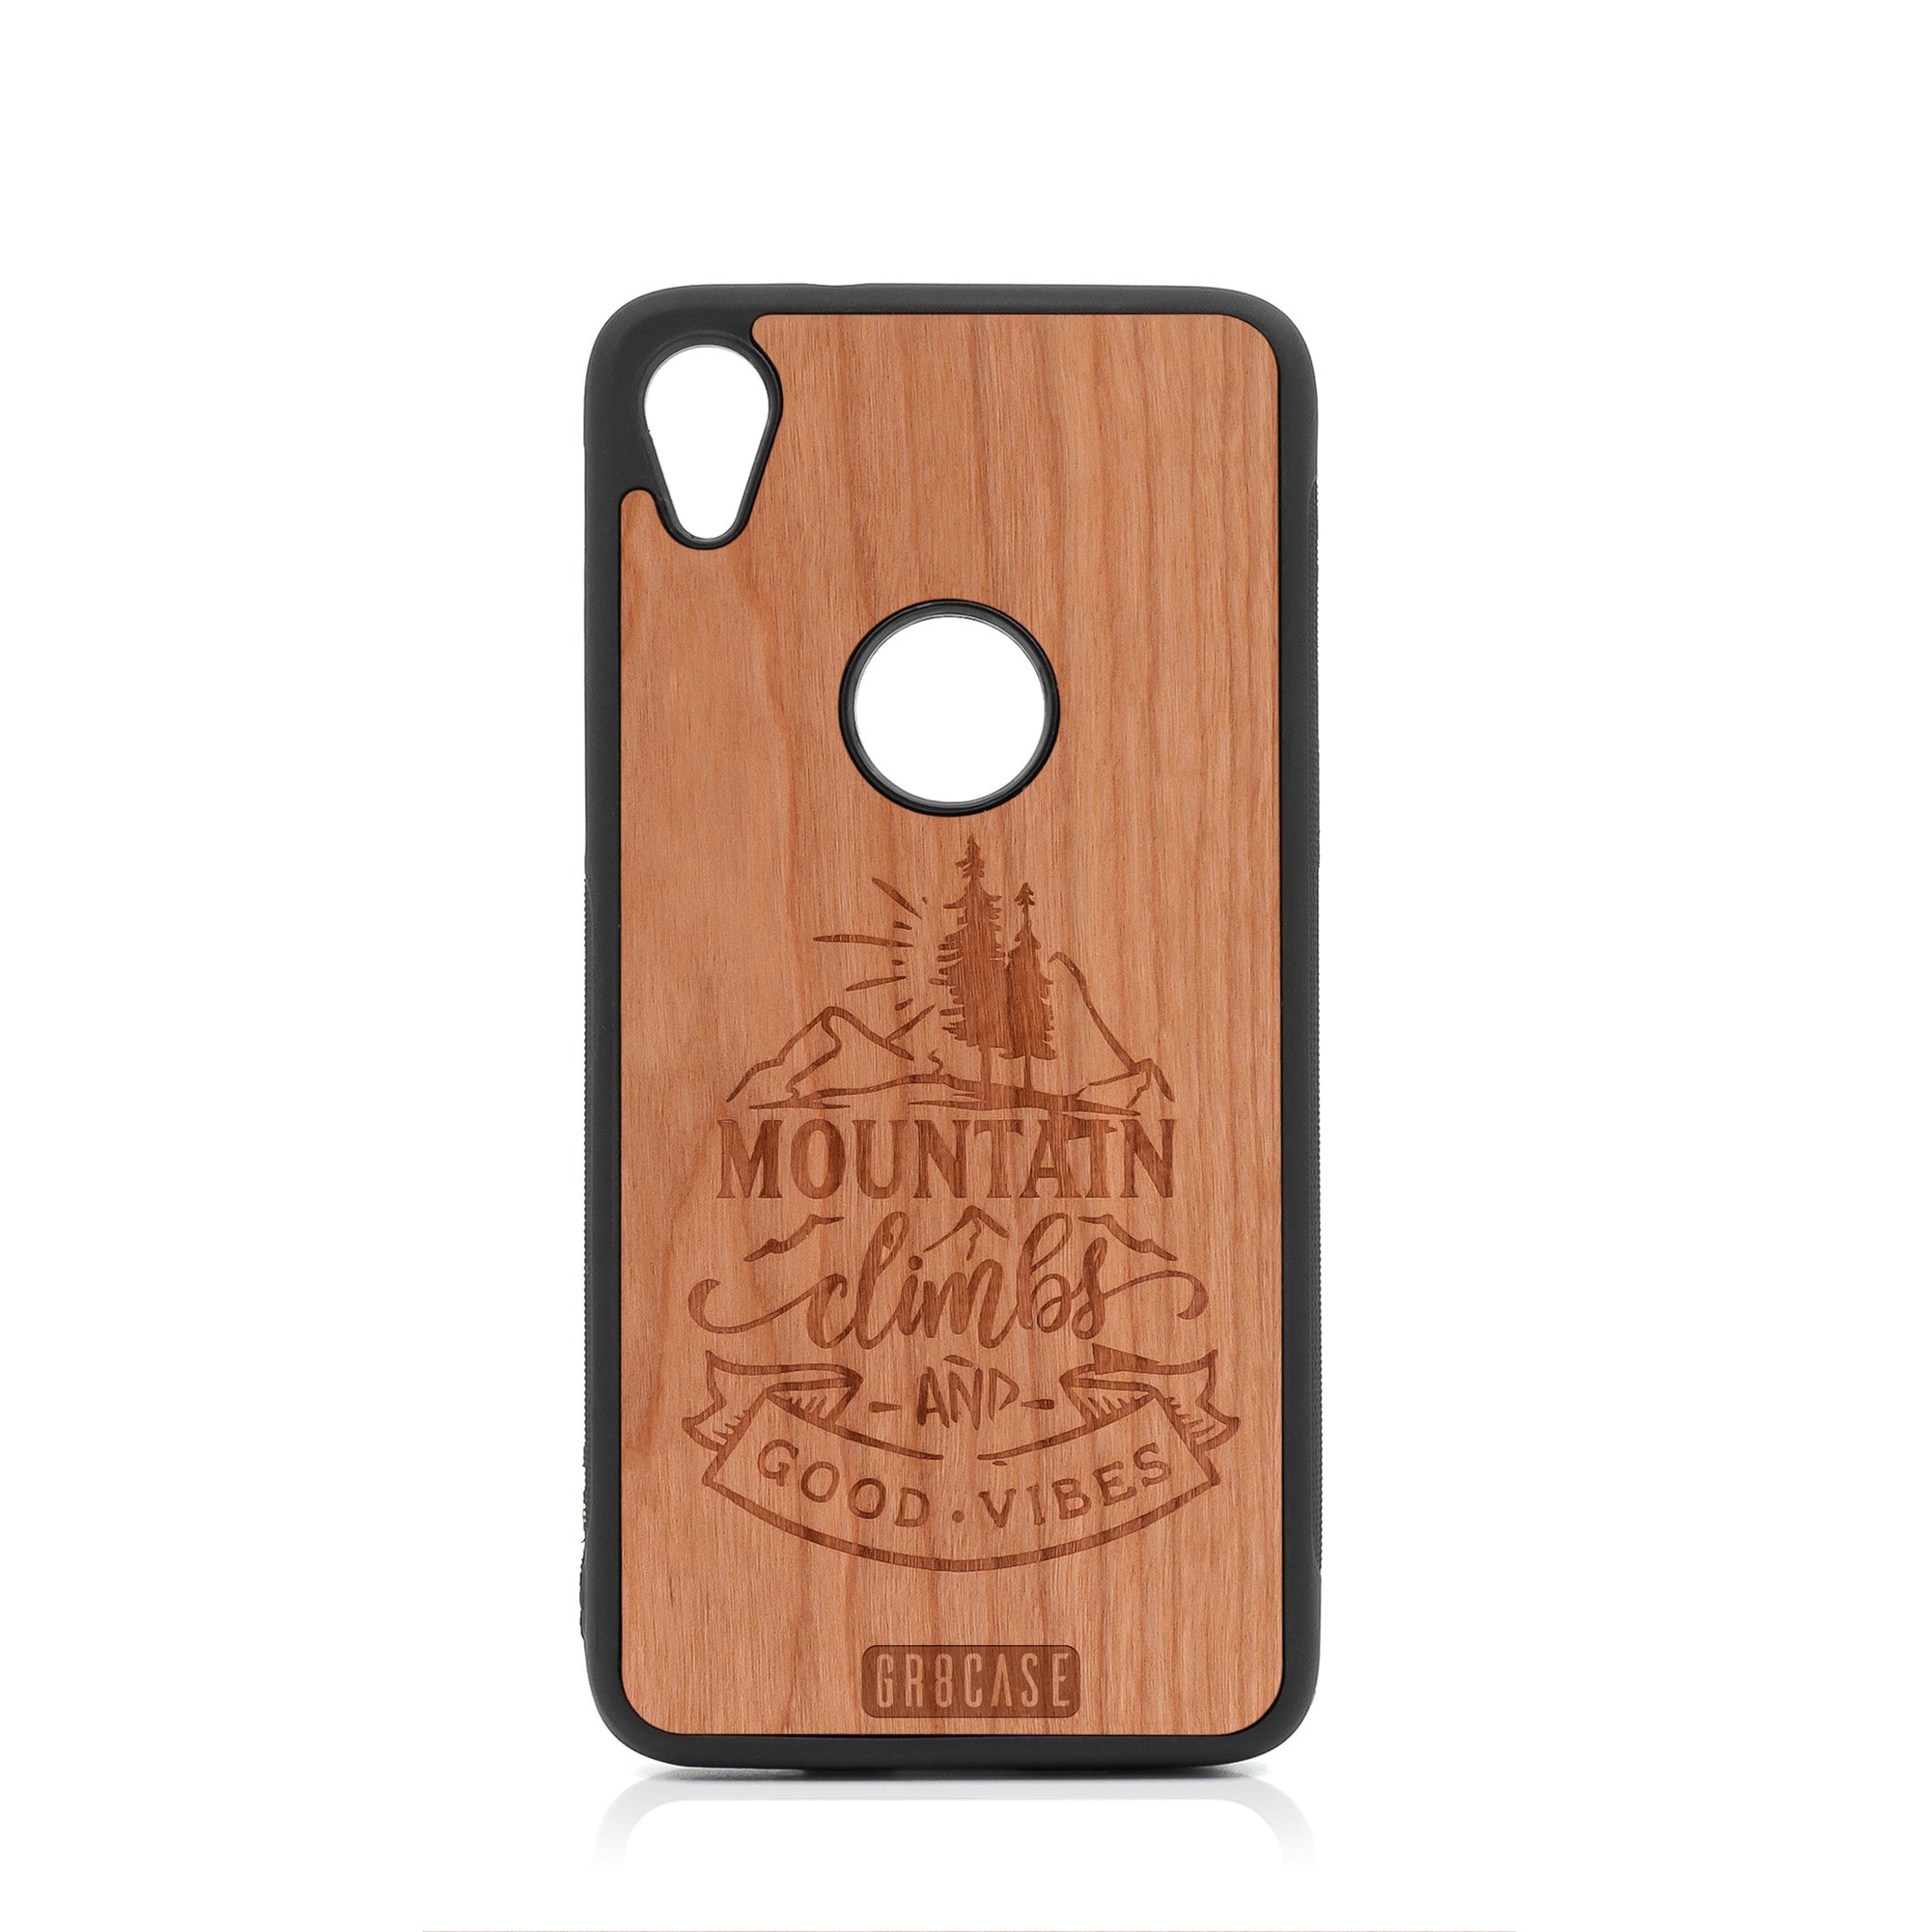 Mountain Climbs And Good Vibes Design Wood Case For Moto E6 by GR8CASE